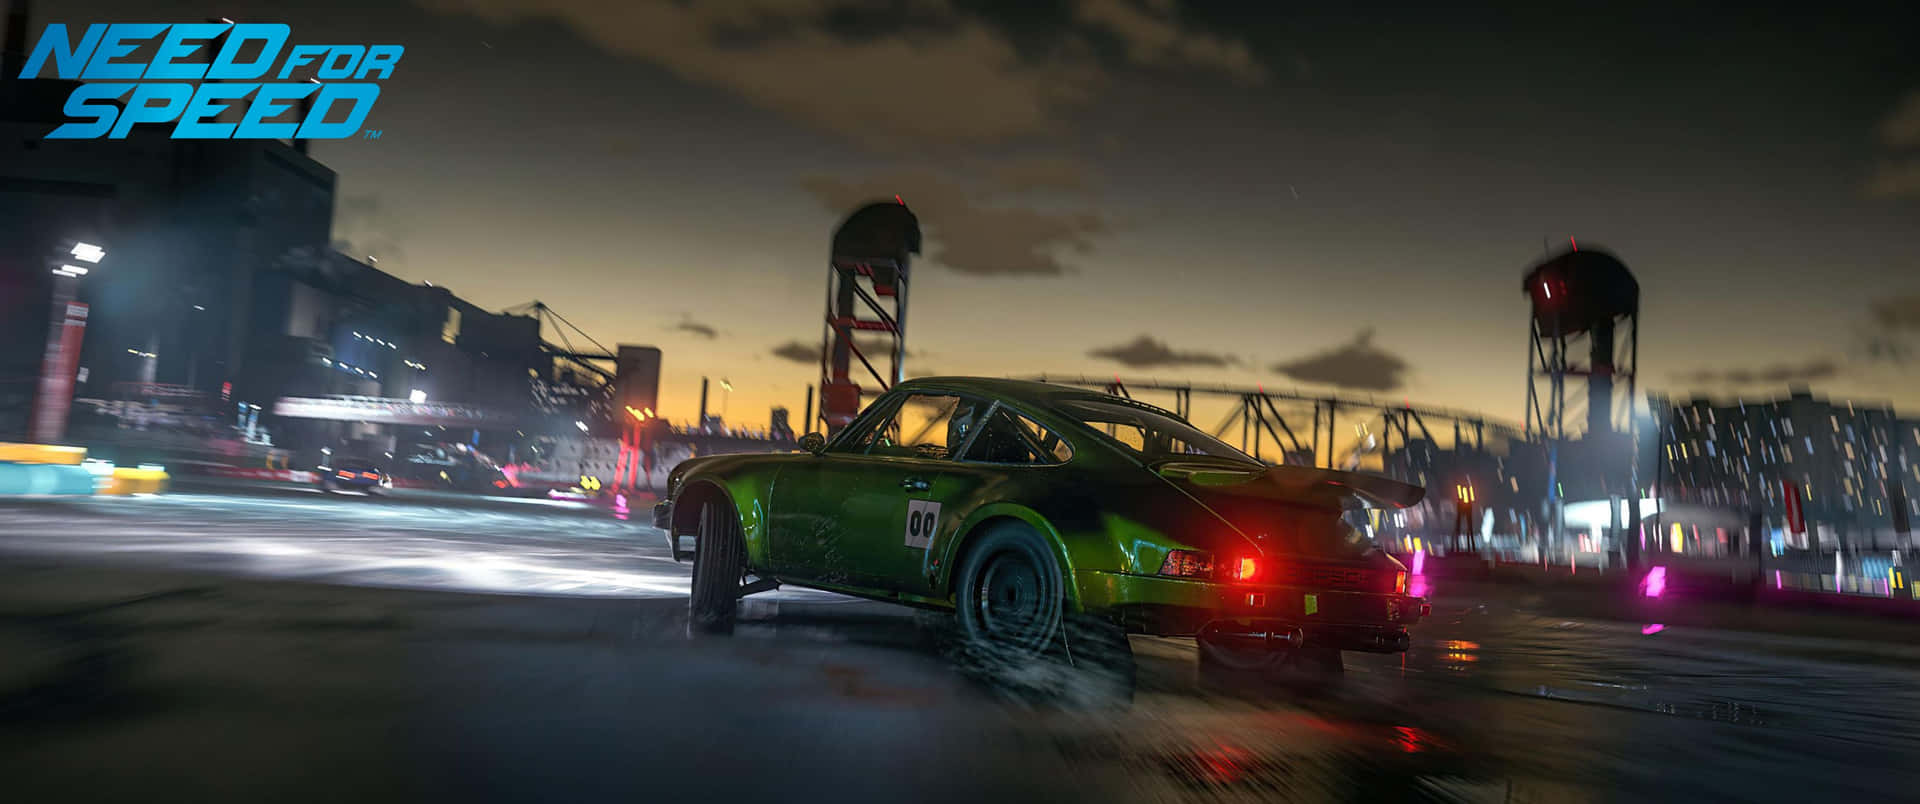 Affrontala Folla In Need For Speed